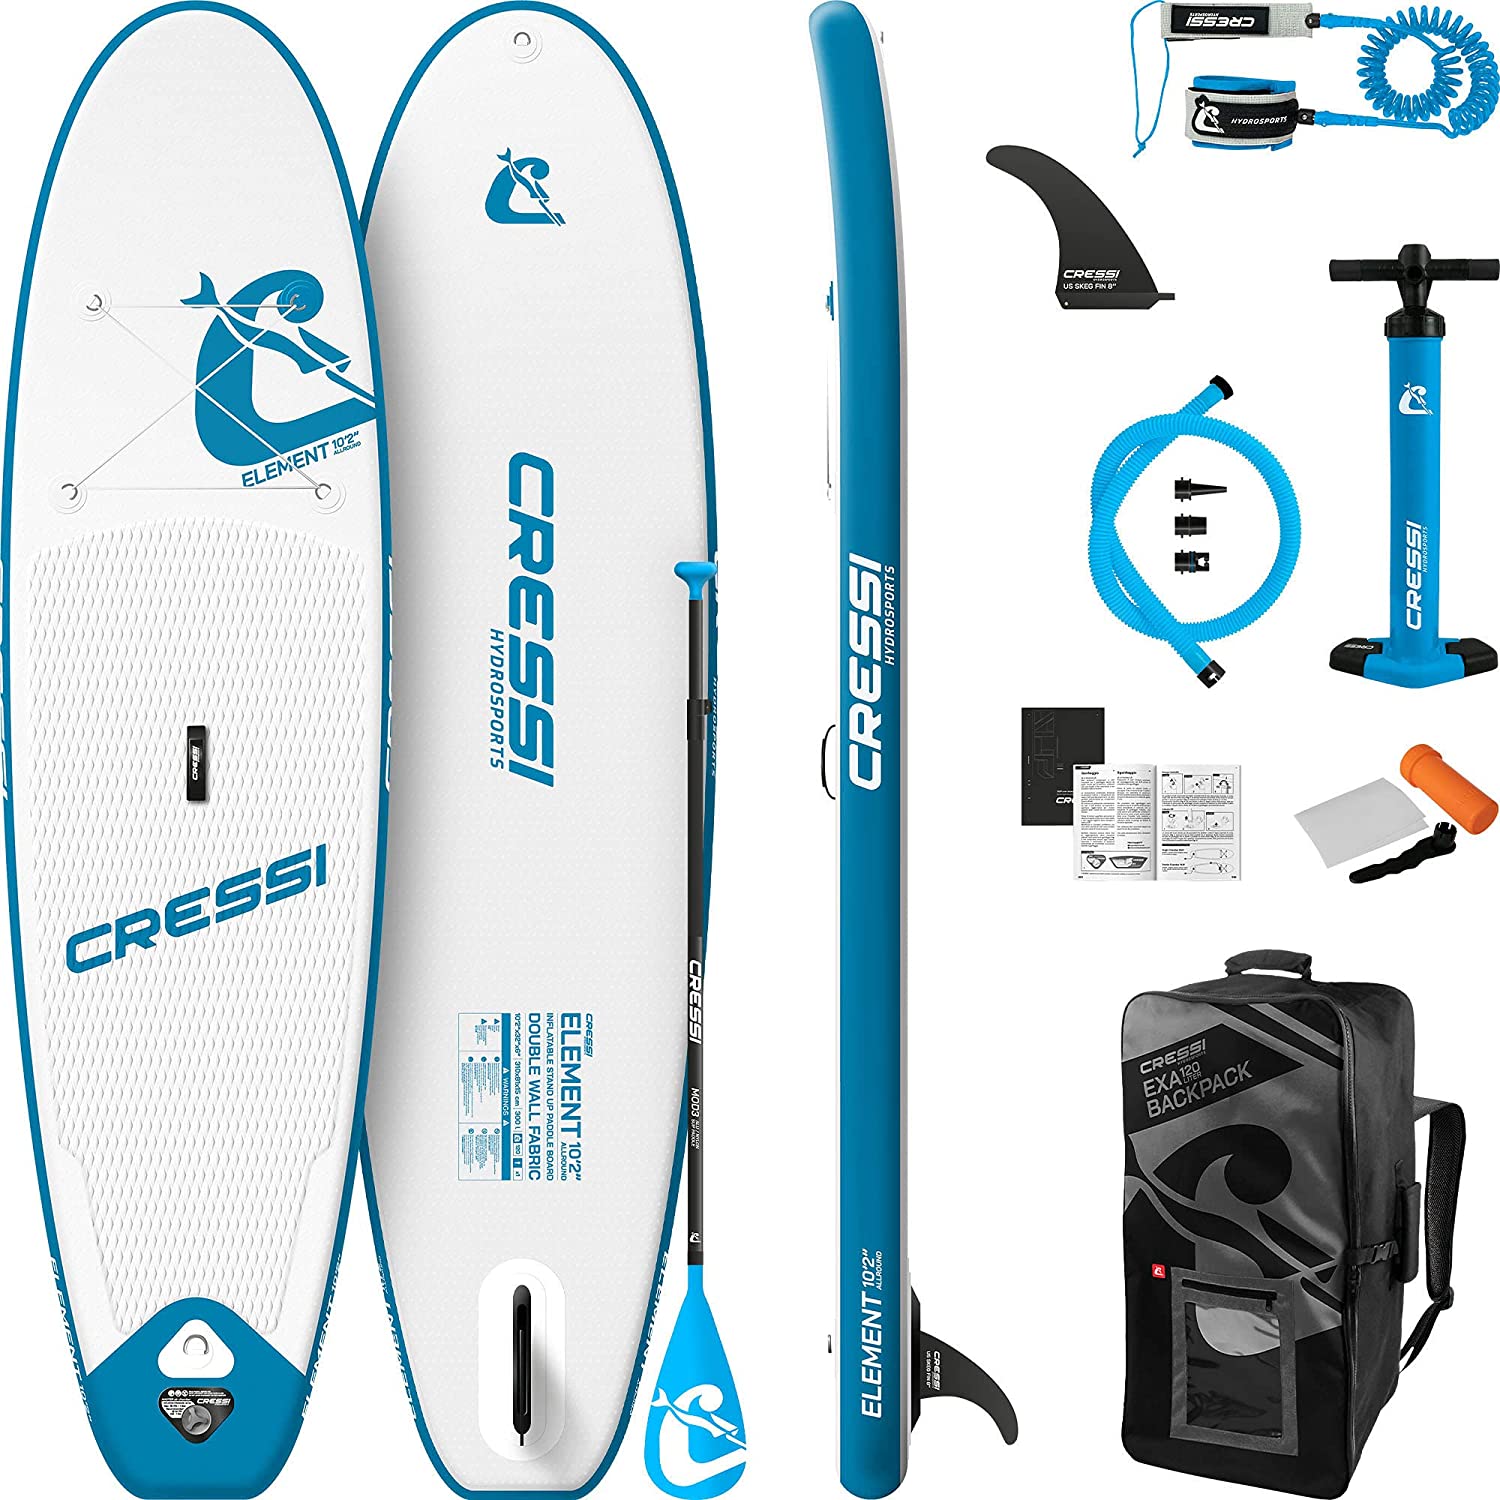 CRESSI ELEMENT ALL ROUND iSUP SET 10'2" SUP Stand Up Paddling Board